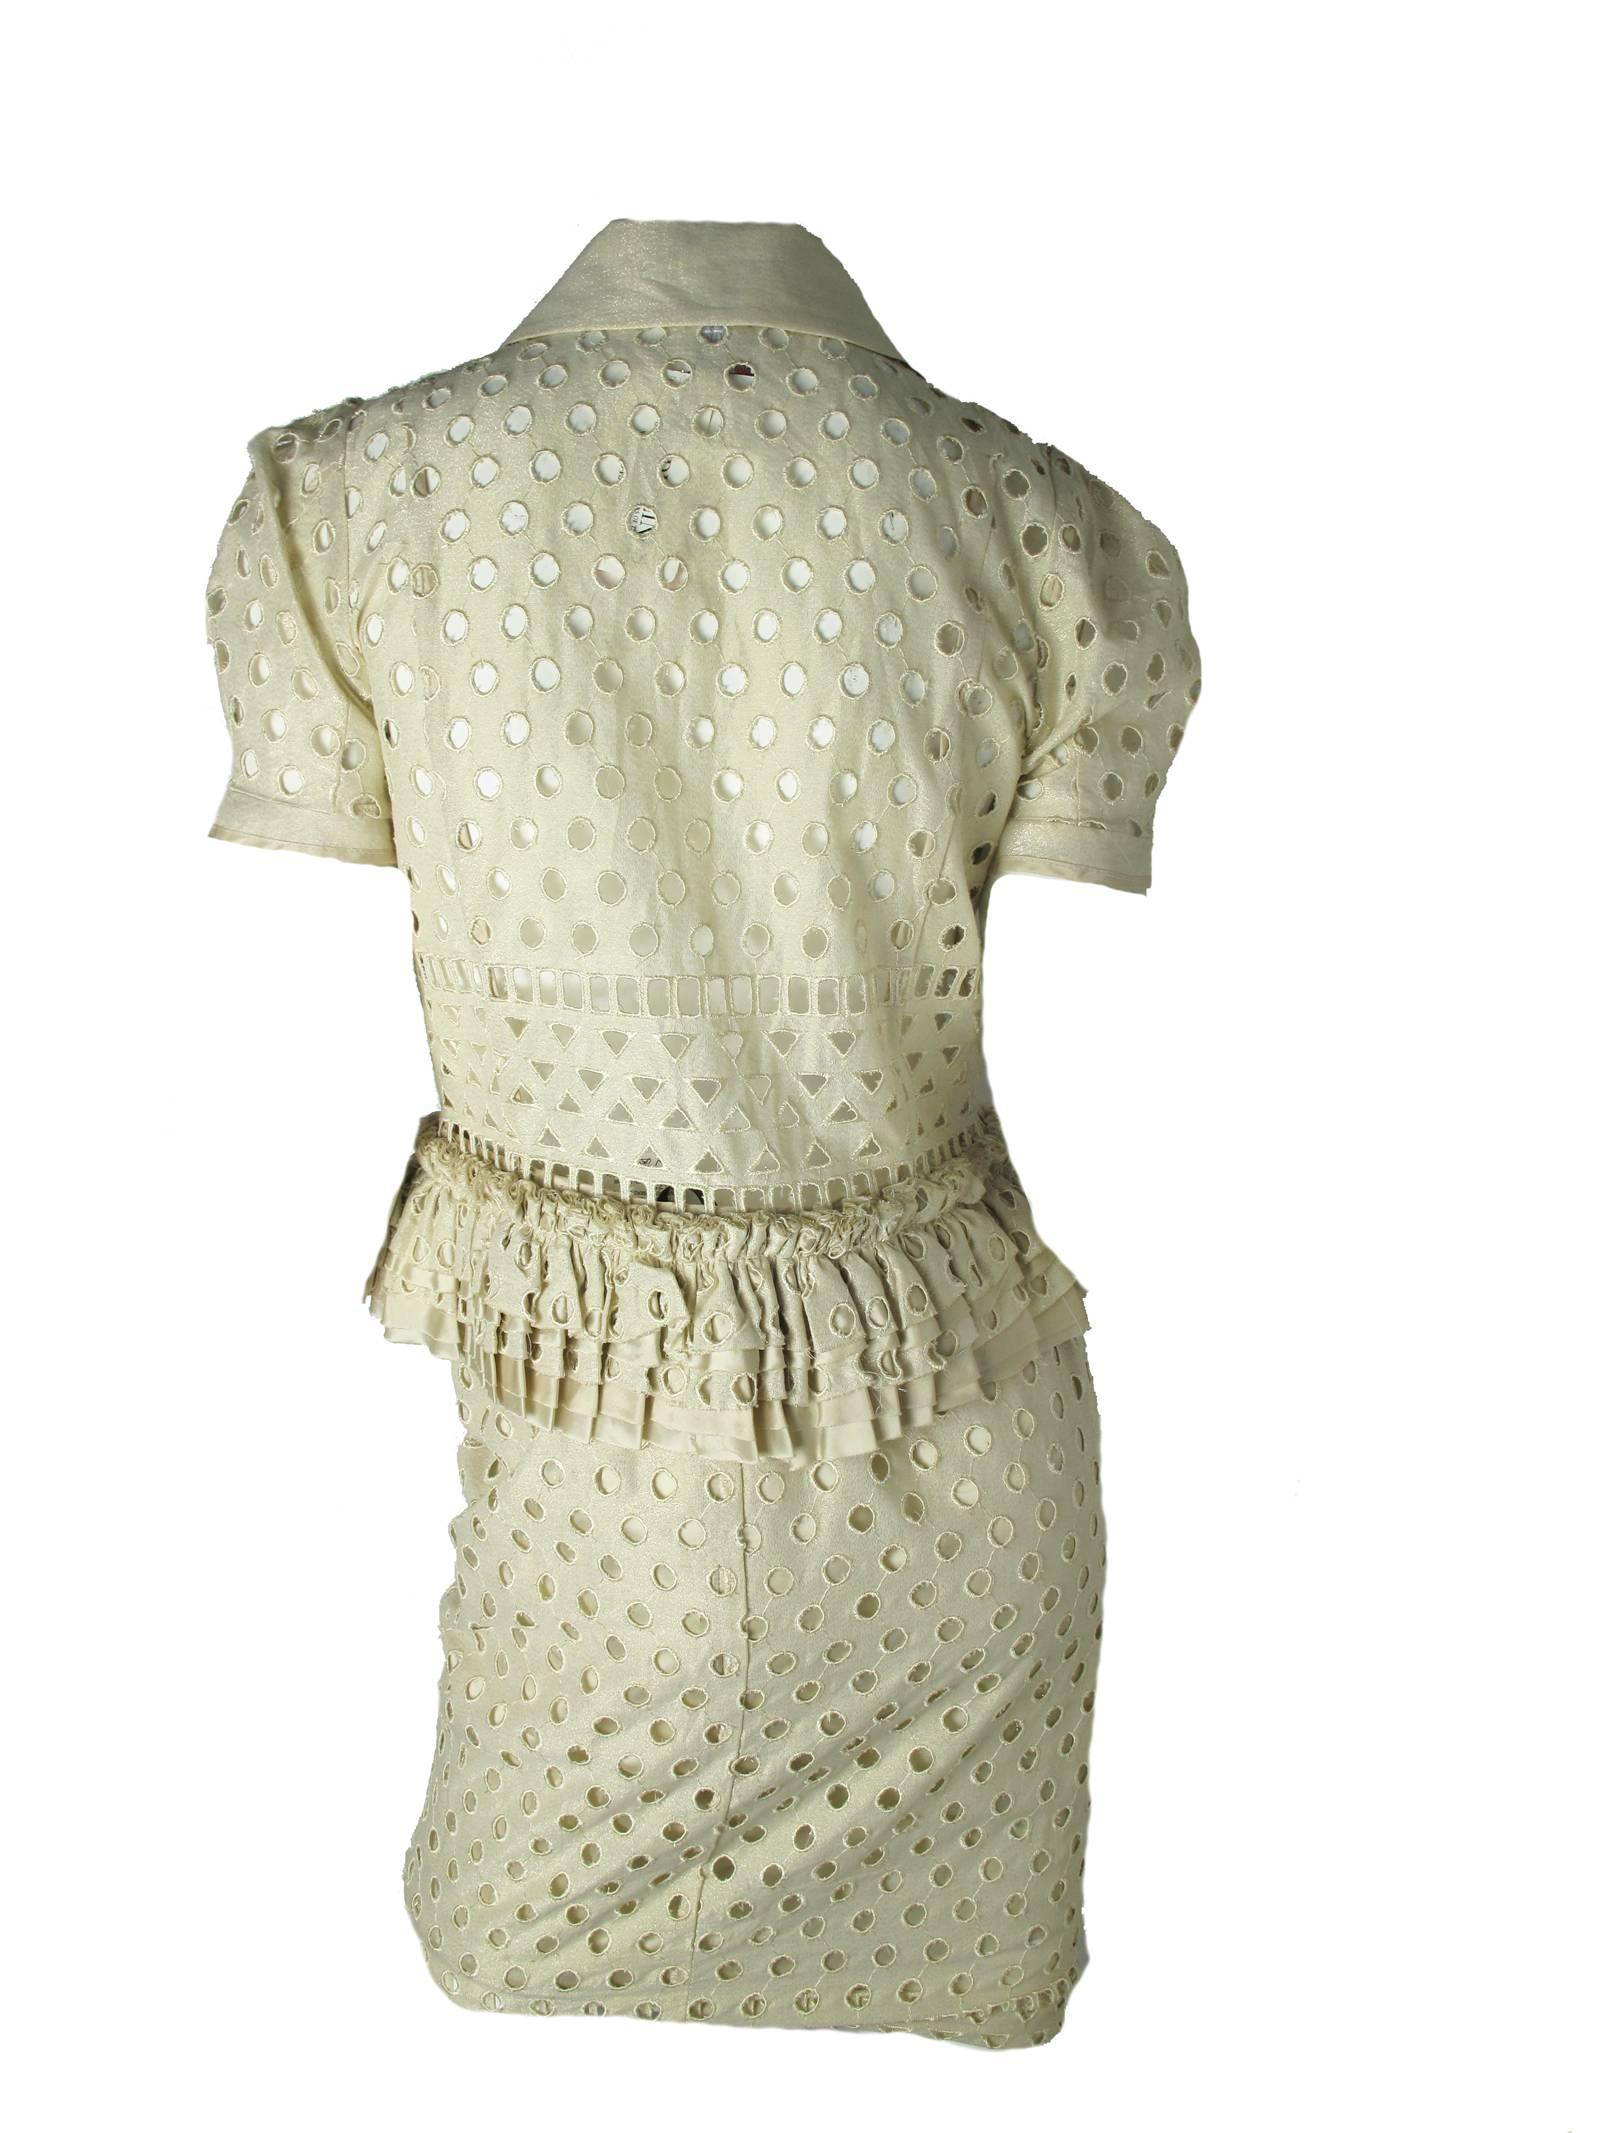 Valentino gold cotton eyelet skirt and top.  Condition: Excellent, tags still attached.  Size 42

We accept returns for refund, please see our terms.  We offer free ground shipping within the US.  Please let us know if you have any questions.